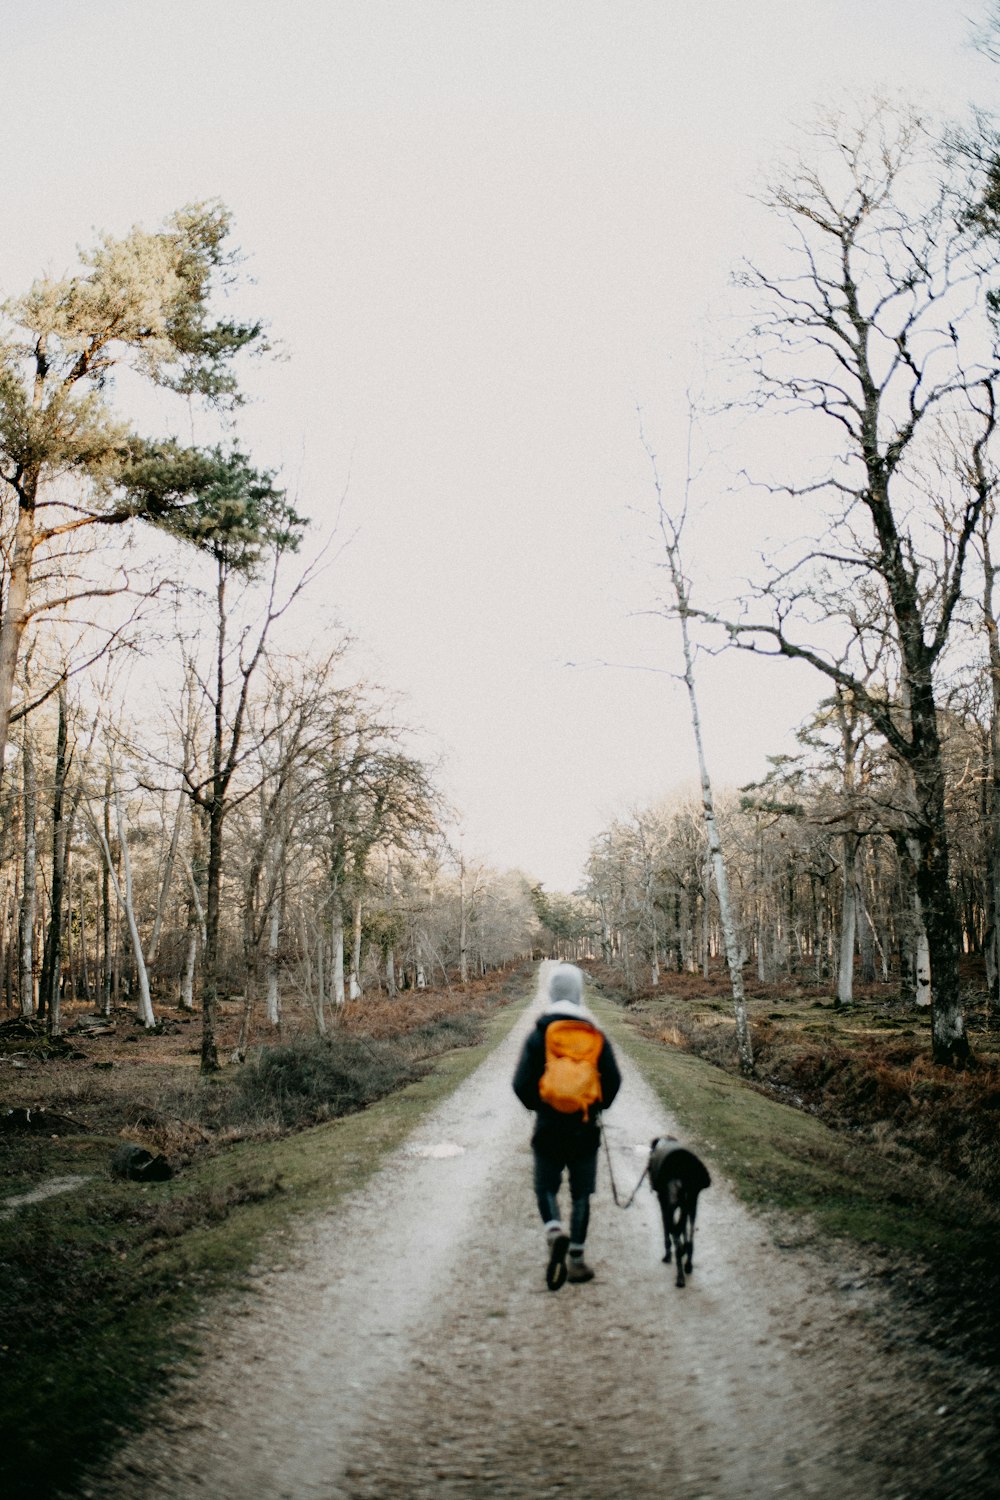 a person walking down a dirt road with a dog